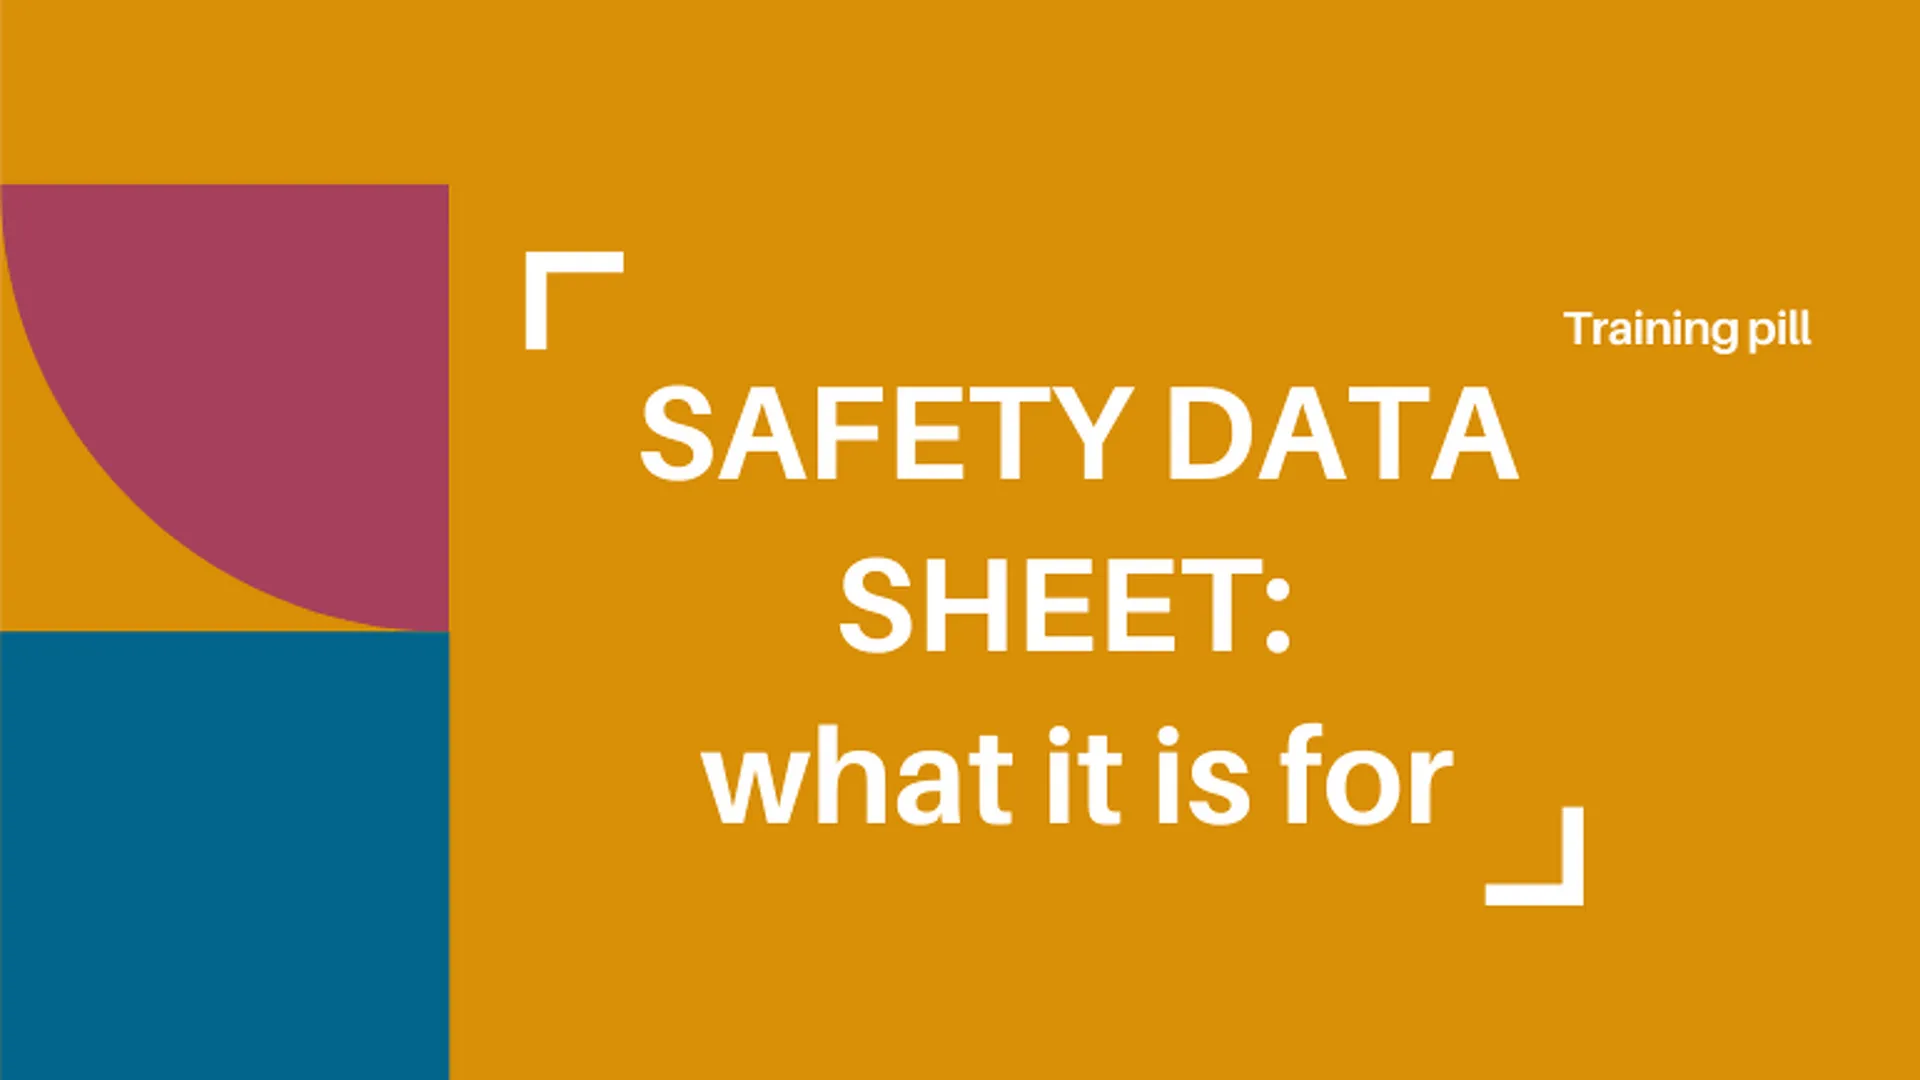 SAFETY DATA SHEET: what it is for